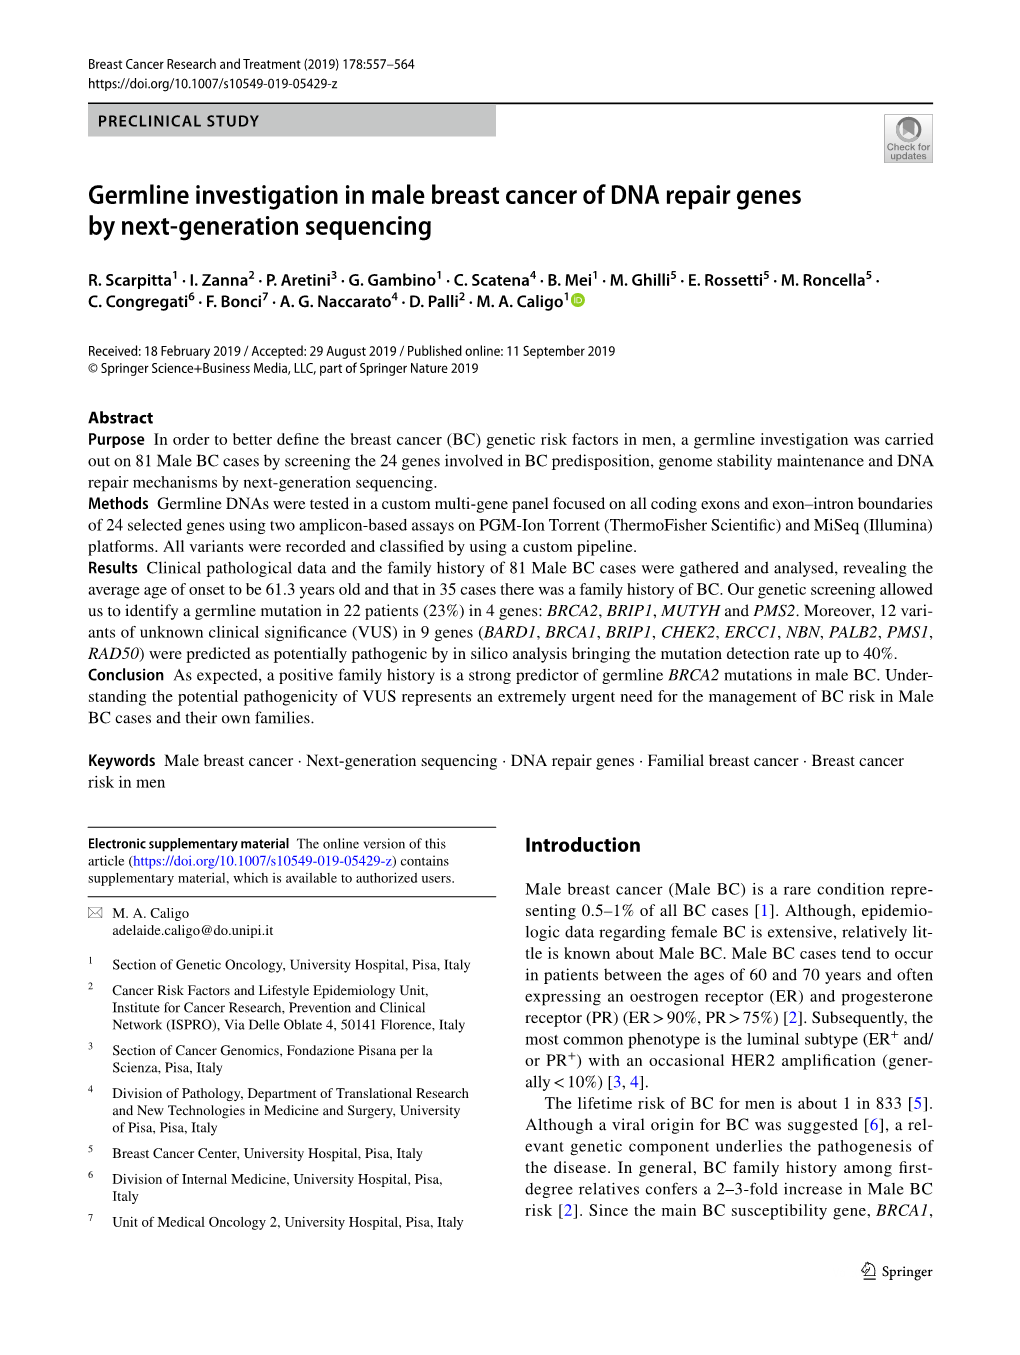 Germline Investigation in Male Breast Cancer of DNA Repair Genes by Next-Generation Sequencing